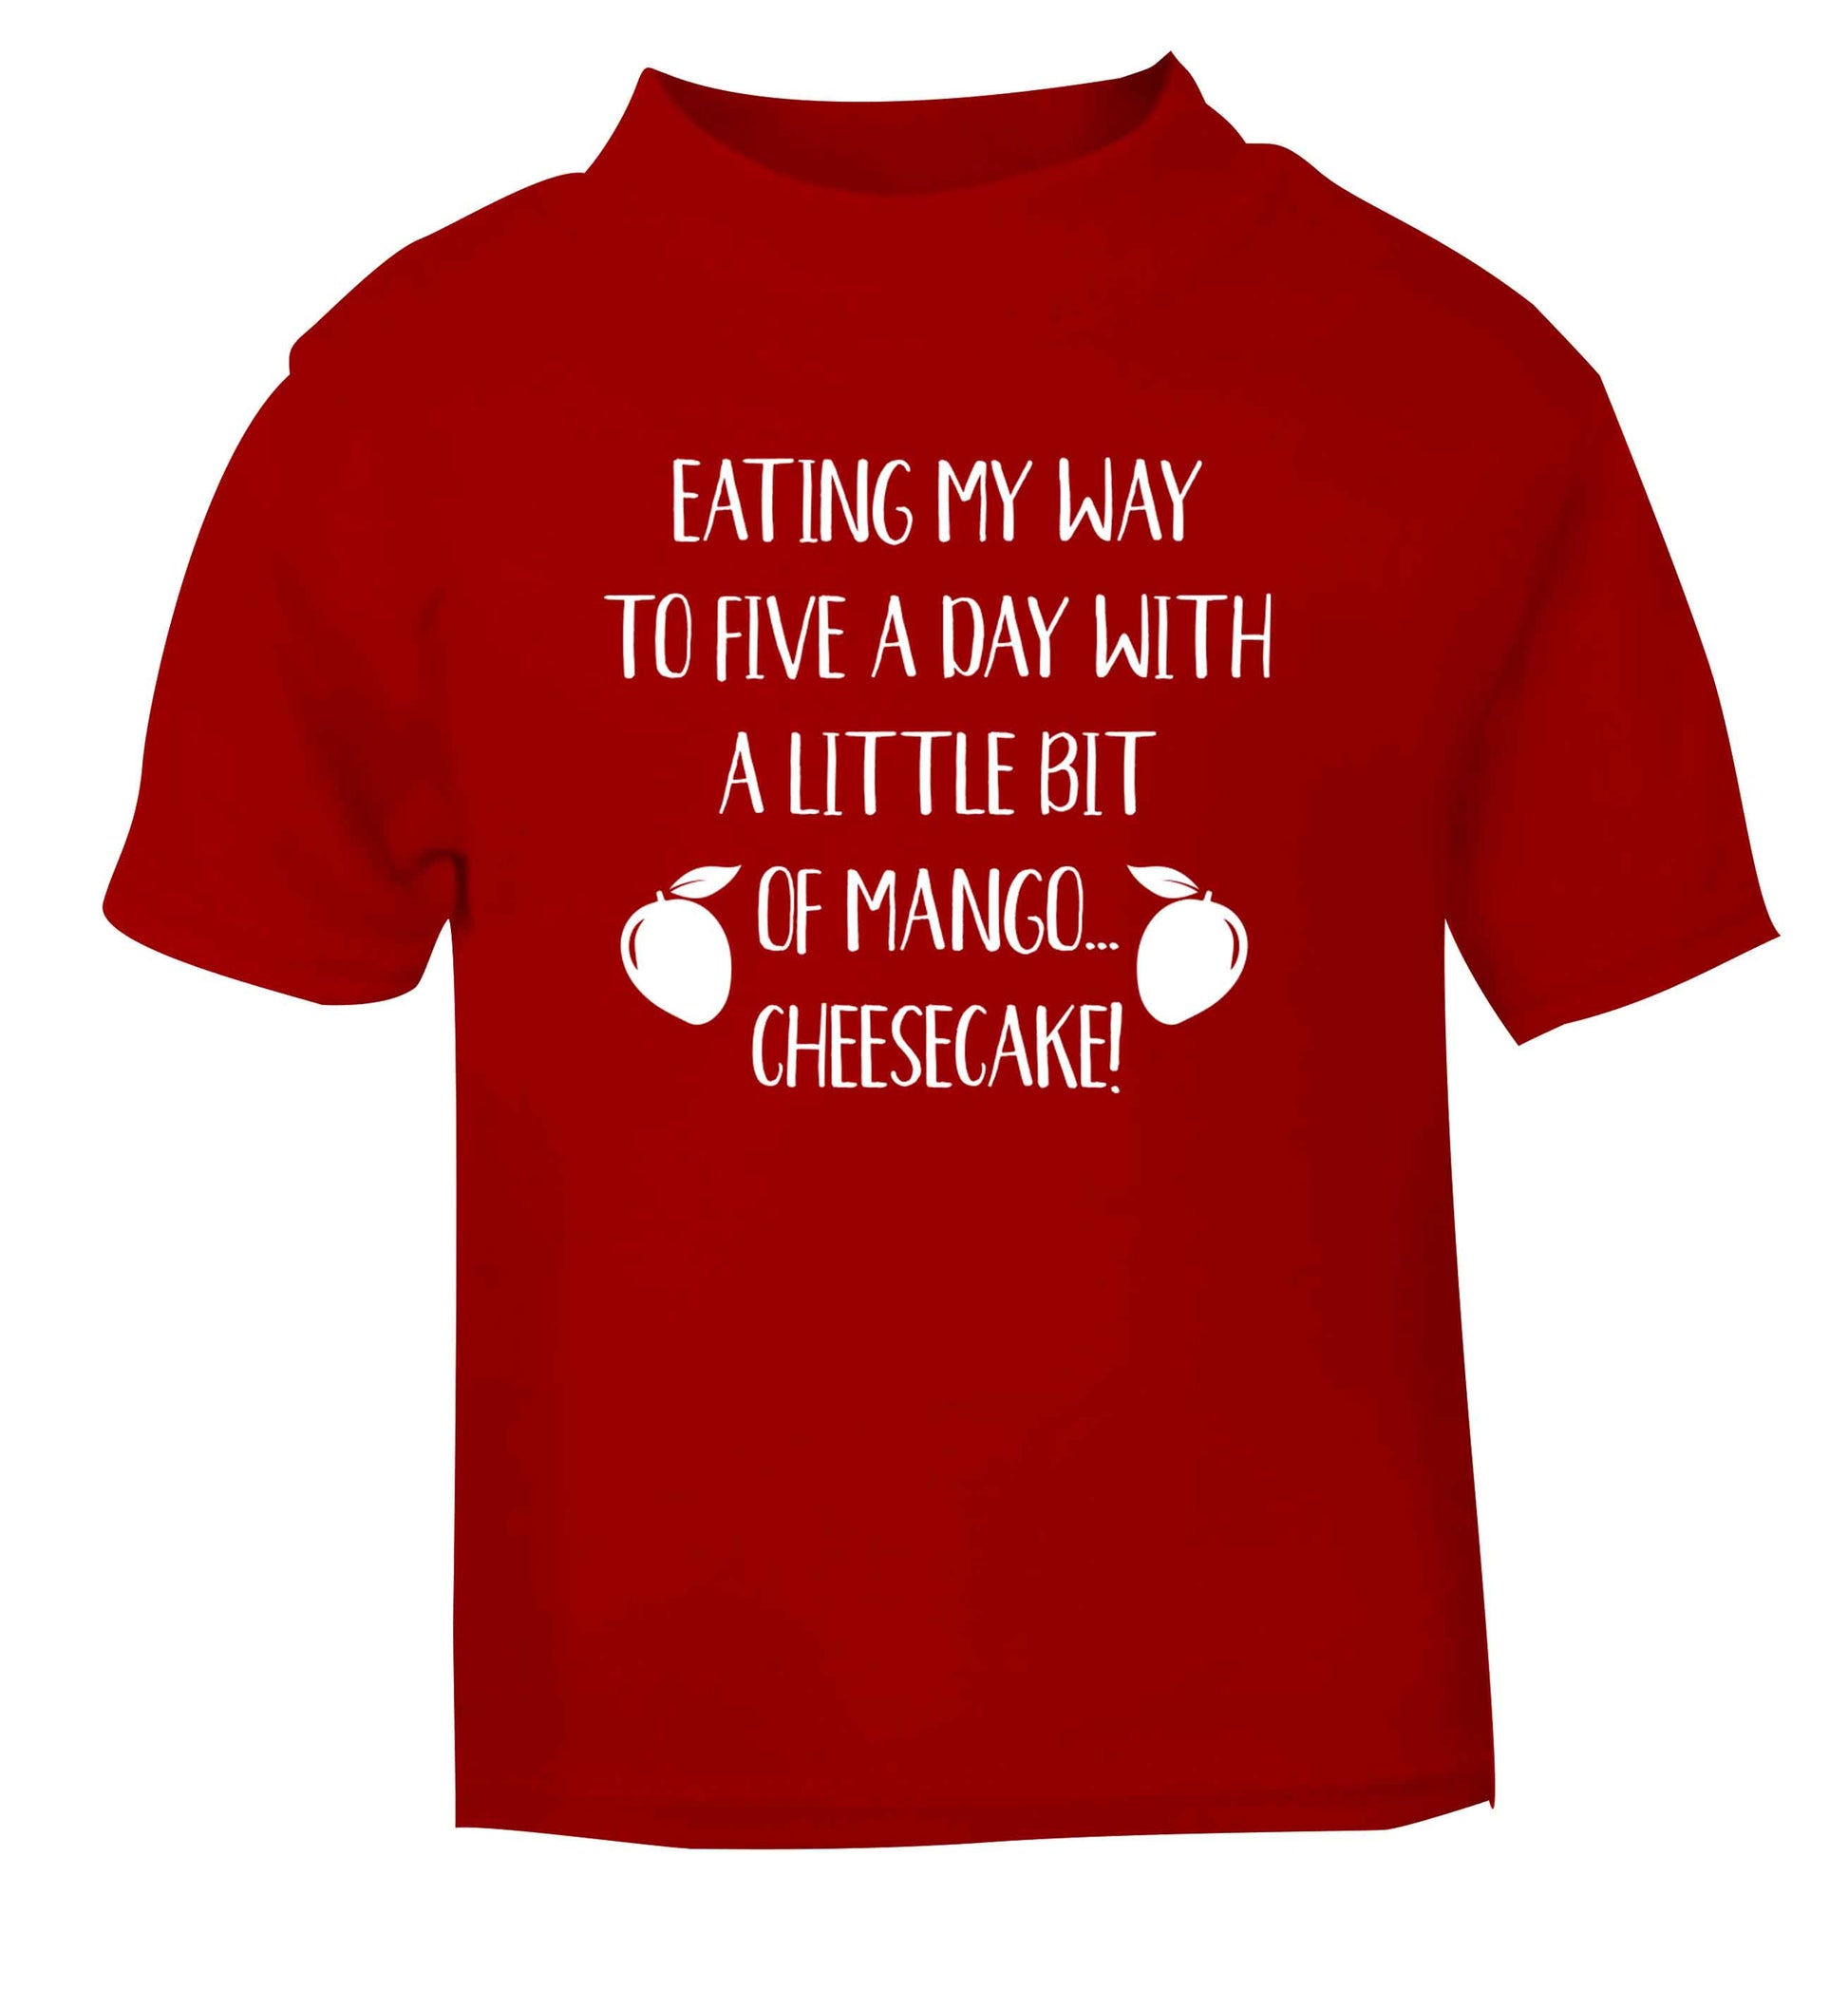 Eating my way to five a day with a little bit of mango cheesecake red Baby Toddler Tshirt 2 Years